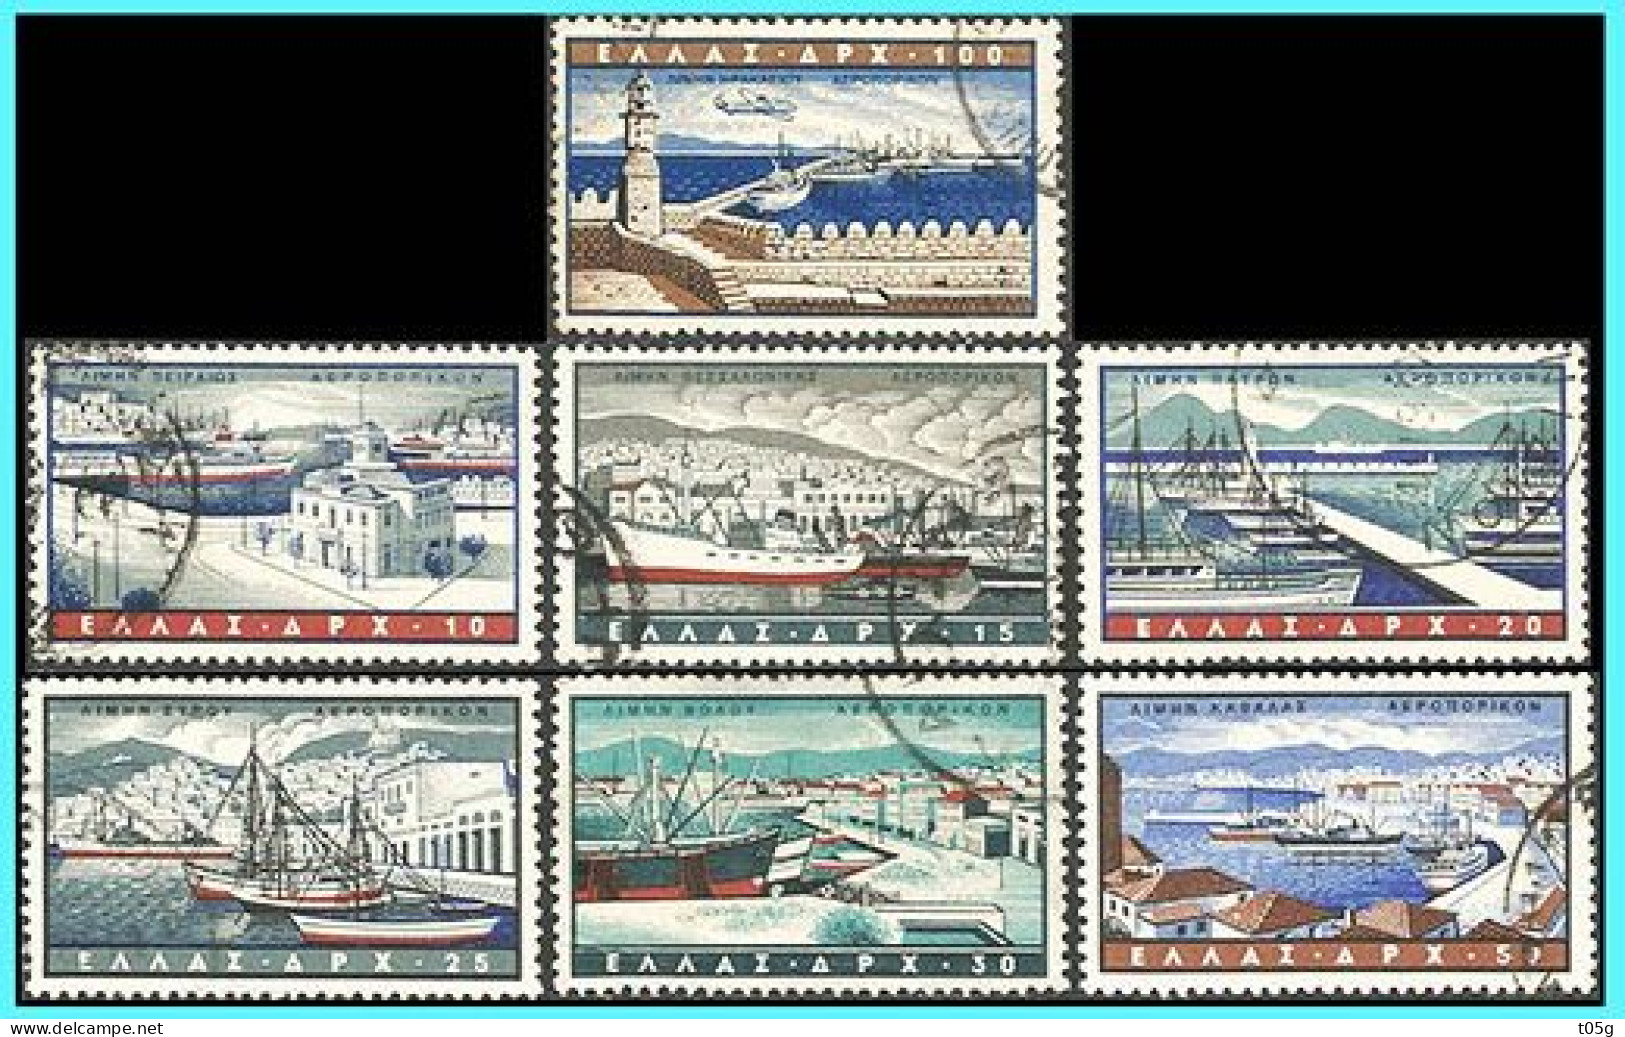 GREECE- GRECE - HELLAS 1958: Airpost Stamps: "Ports" Compl. Set Used - Used Stamps